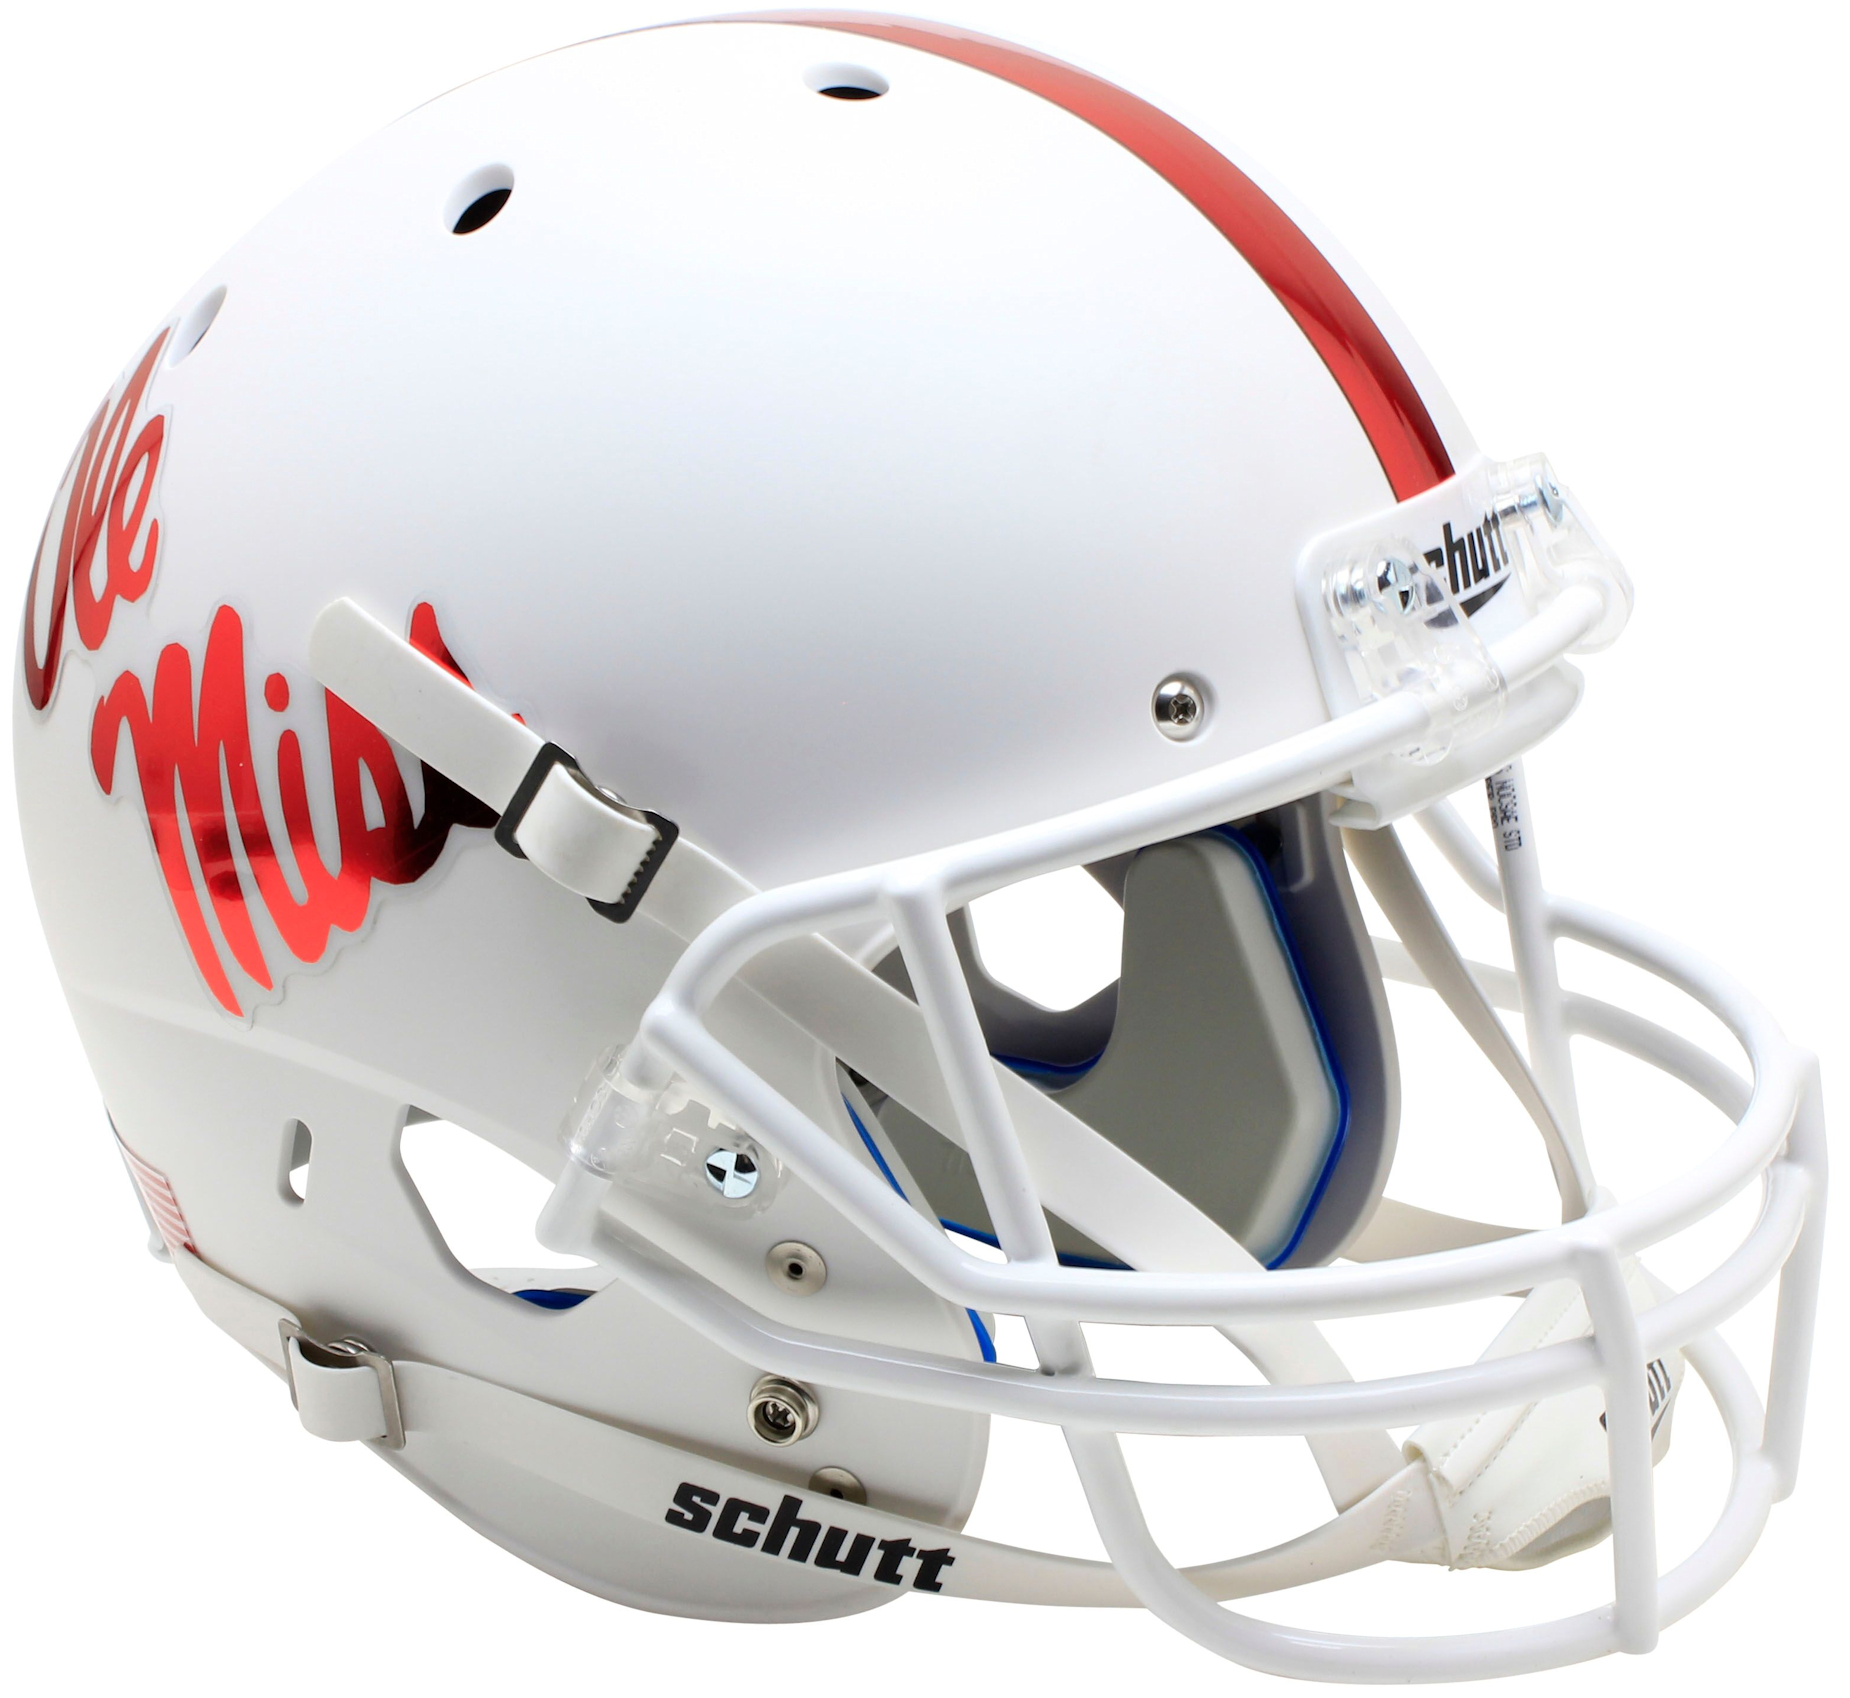 Mississippi (Ole Miss) Rebels Full XP Replica Football Helmet Schutt <B>White With Red Decal</B>